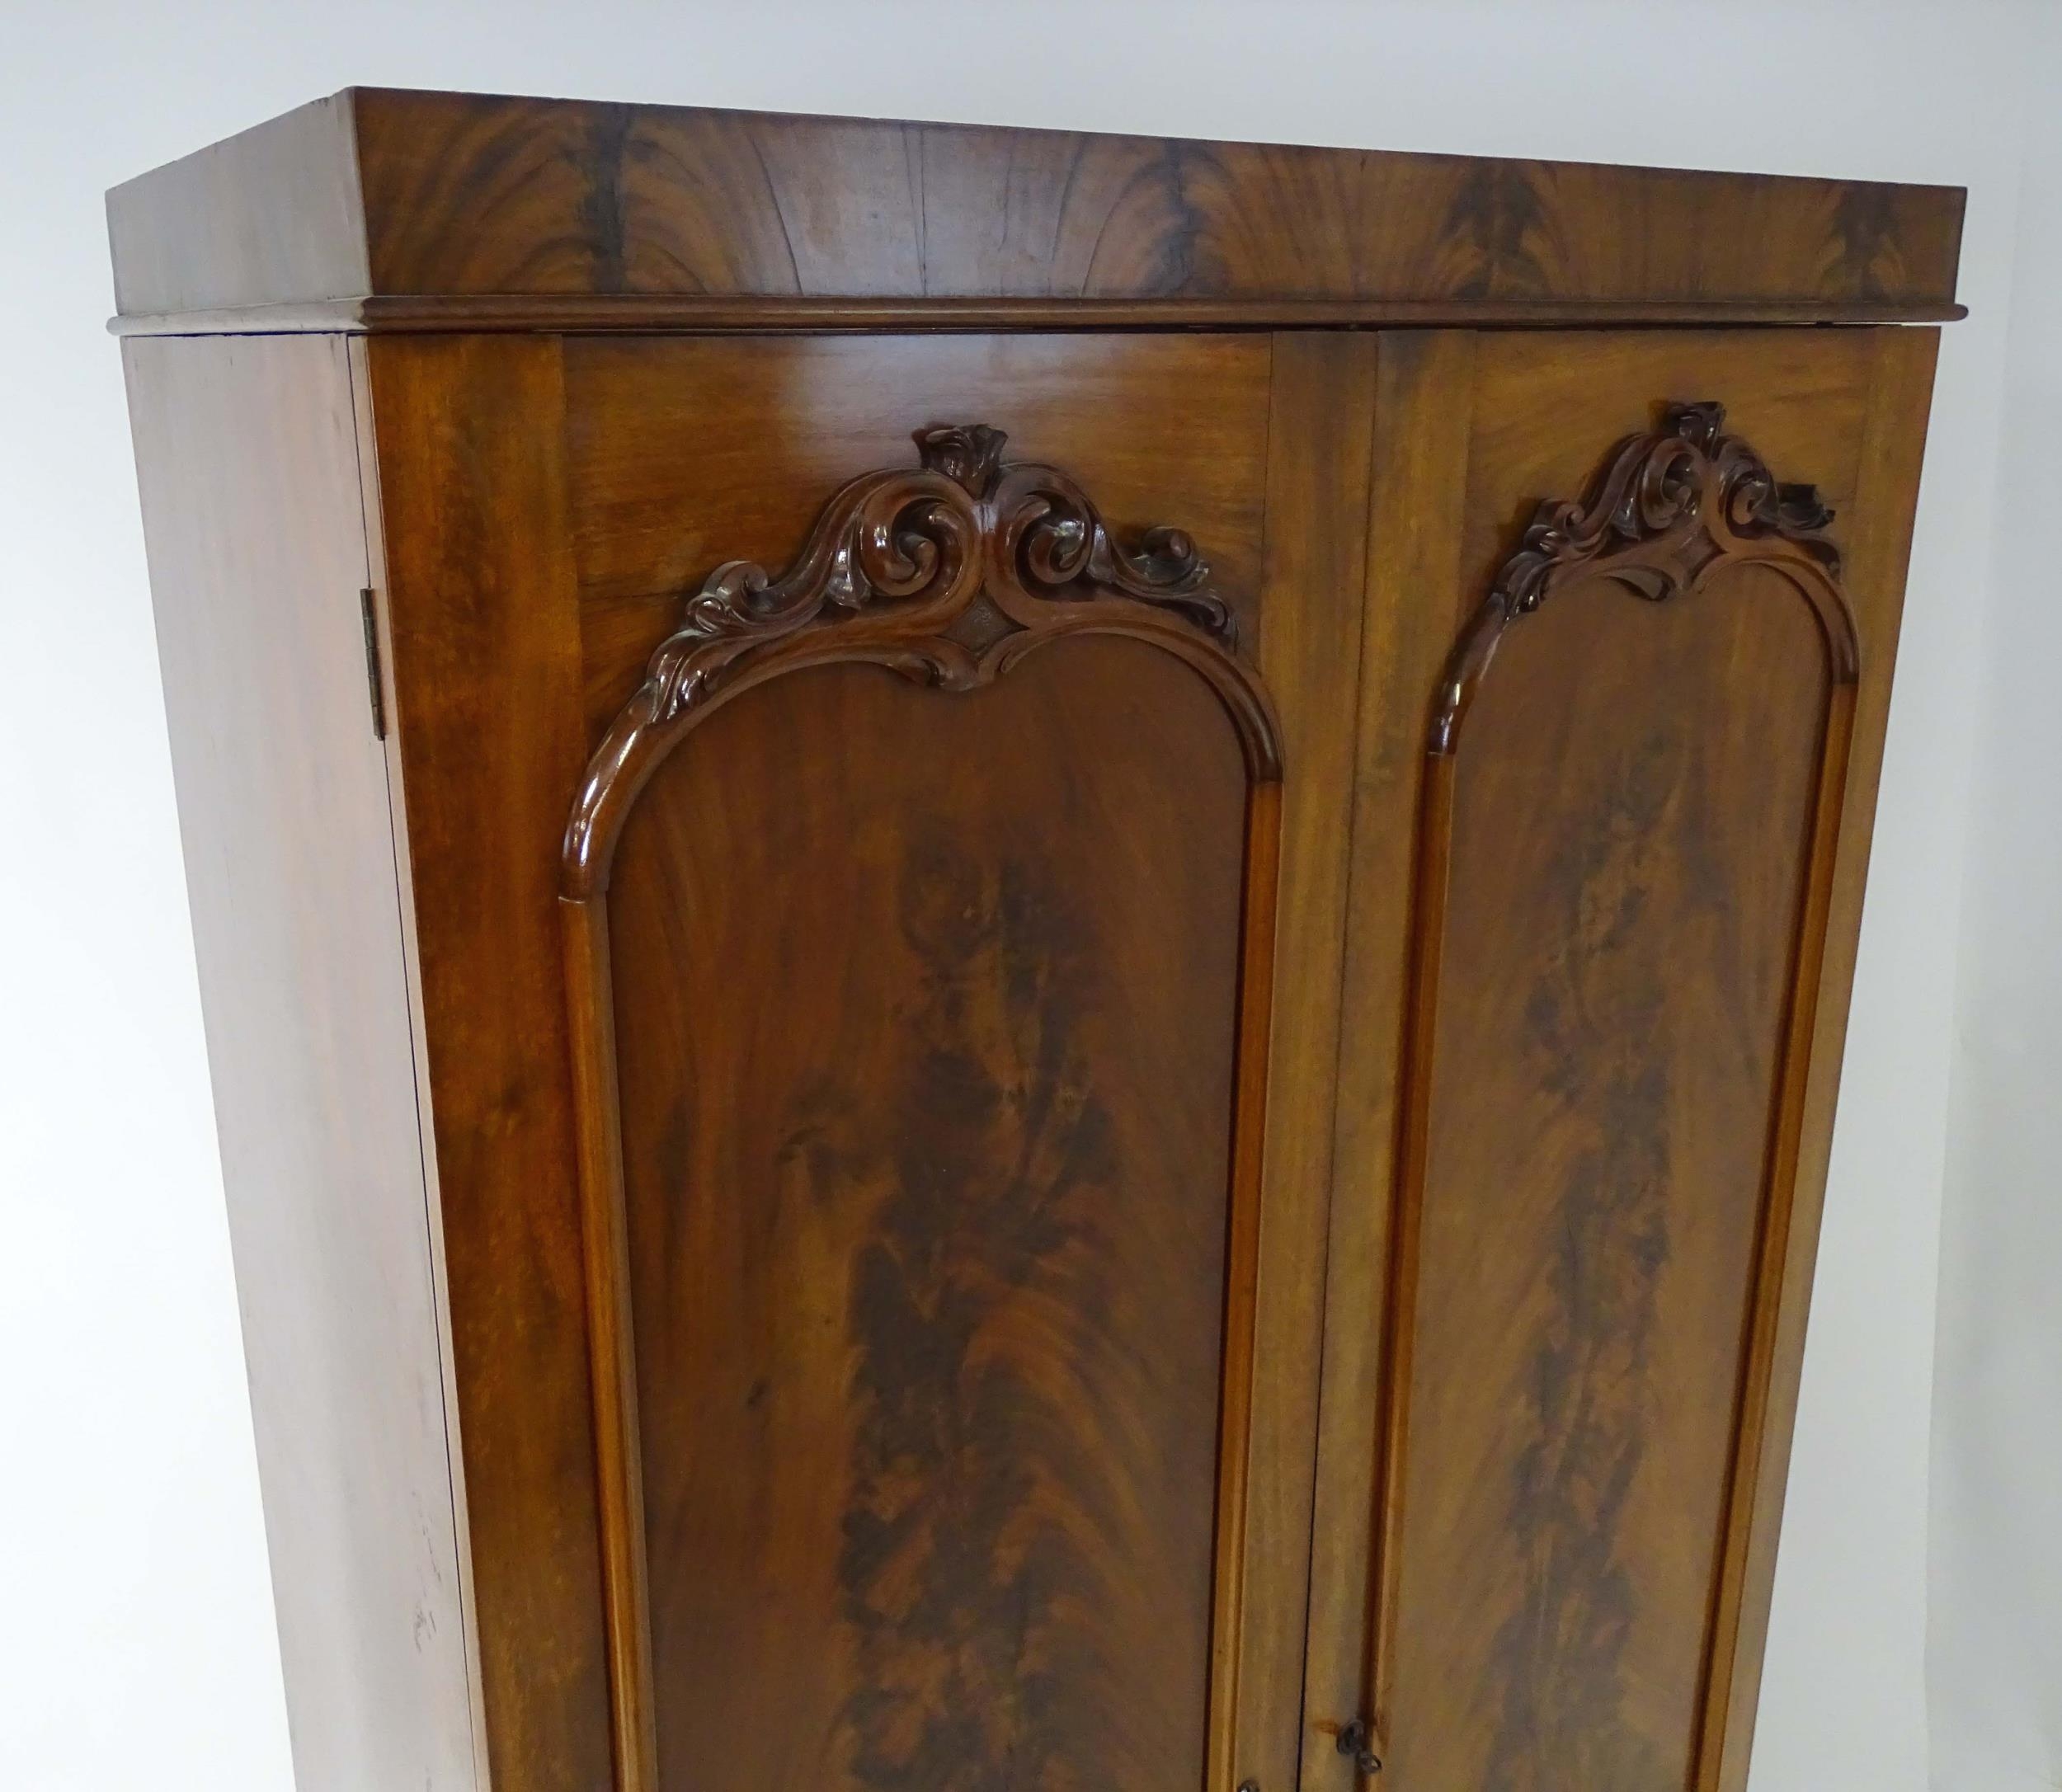 A mid 19thC mahogany double wardrobe with two panelled doors adorned with carved foliage and opening - Image 5 of 9